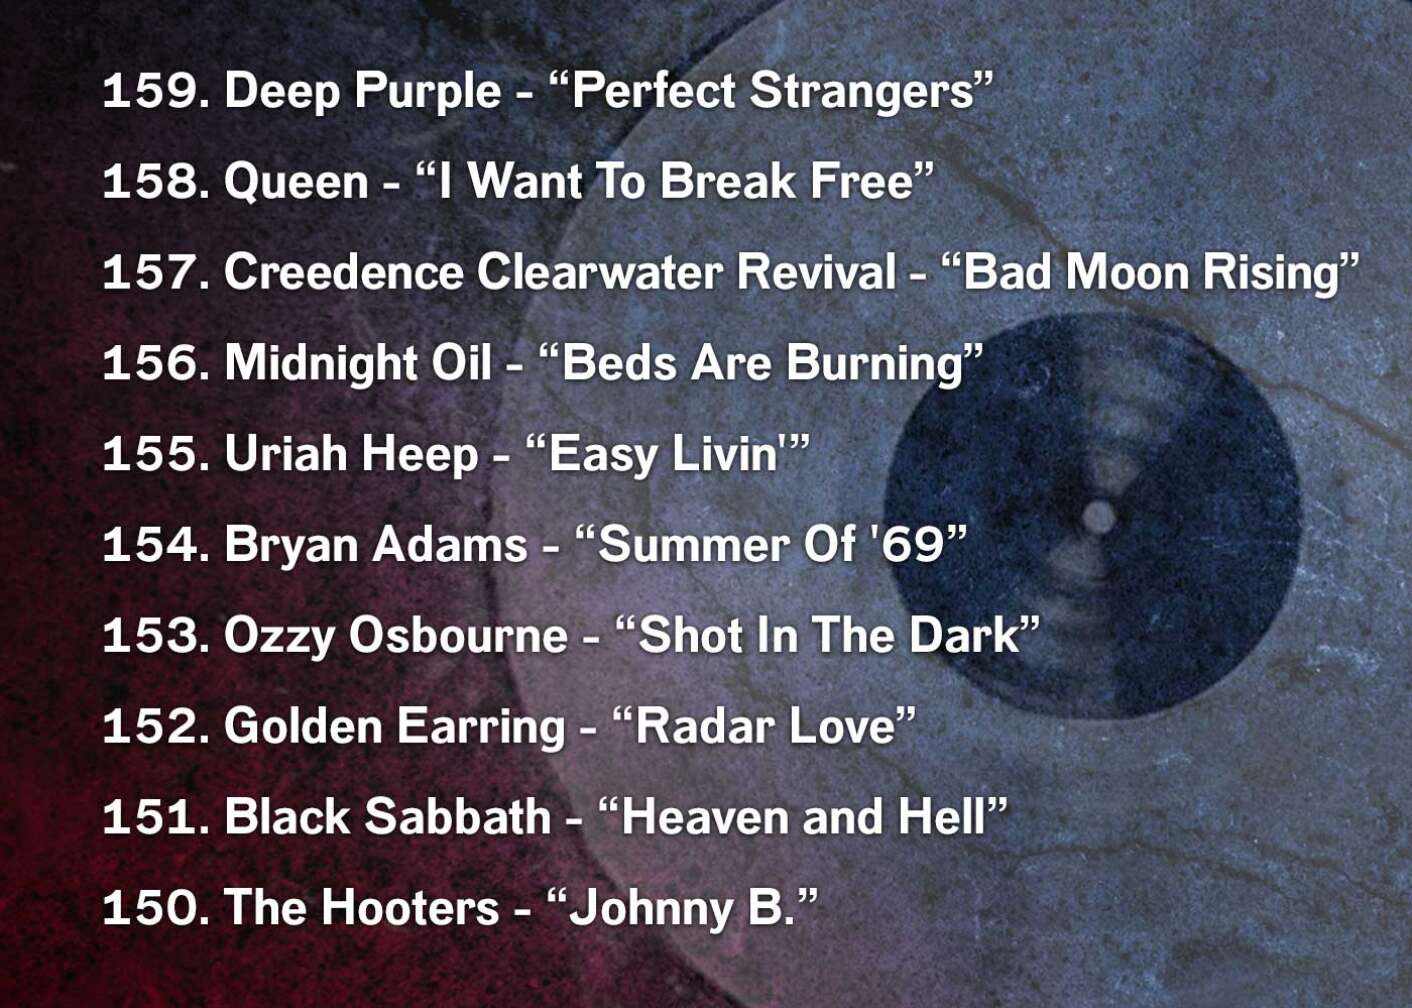 159. Deep Purple - “Perfect Strangers” 158. Queen - “I Want To Break Free” 157. Creedence Clearwater Revival - “Bad Moon Rising” 156. Midnight Oil - “Beds Are Burning” 155. Uriah Heep - “Easy Livin'” 154. Bryan Adams - “Summer Of '69” 153. Ozzy Osbourne - “Shot In The Dark” 152. Golden Earring - “Radar Love” 151. Black Sabbath - “Heaven and Hell” 150. The Hooters - “Johnny B.”